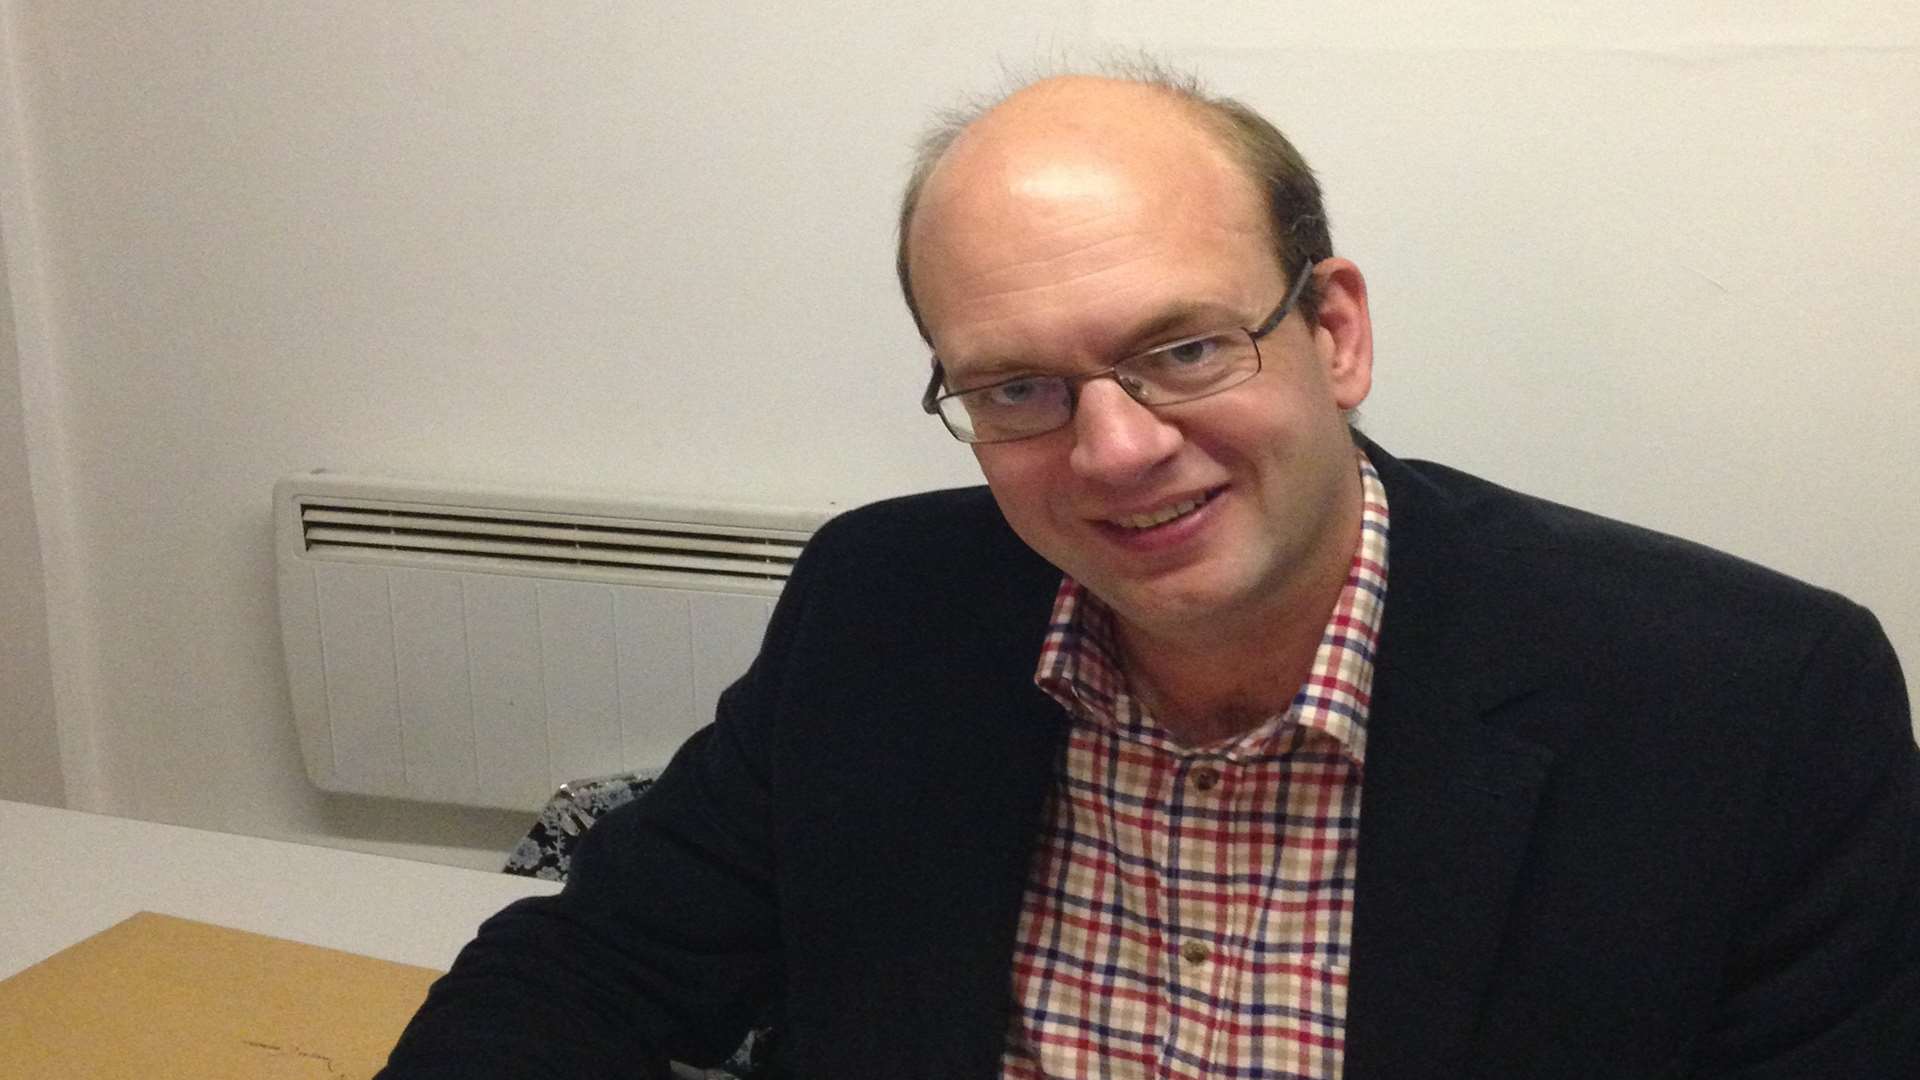 Mark Reckless MP for Rochester and Strood